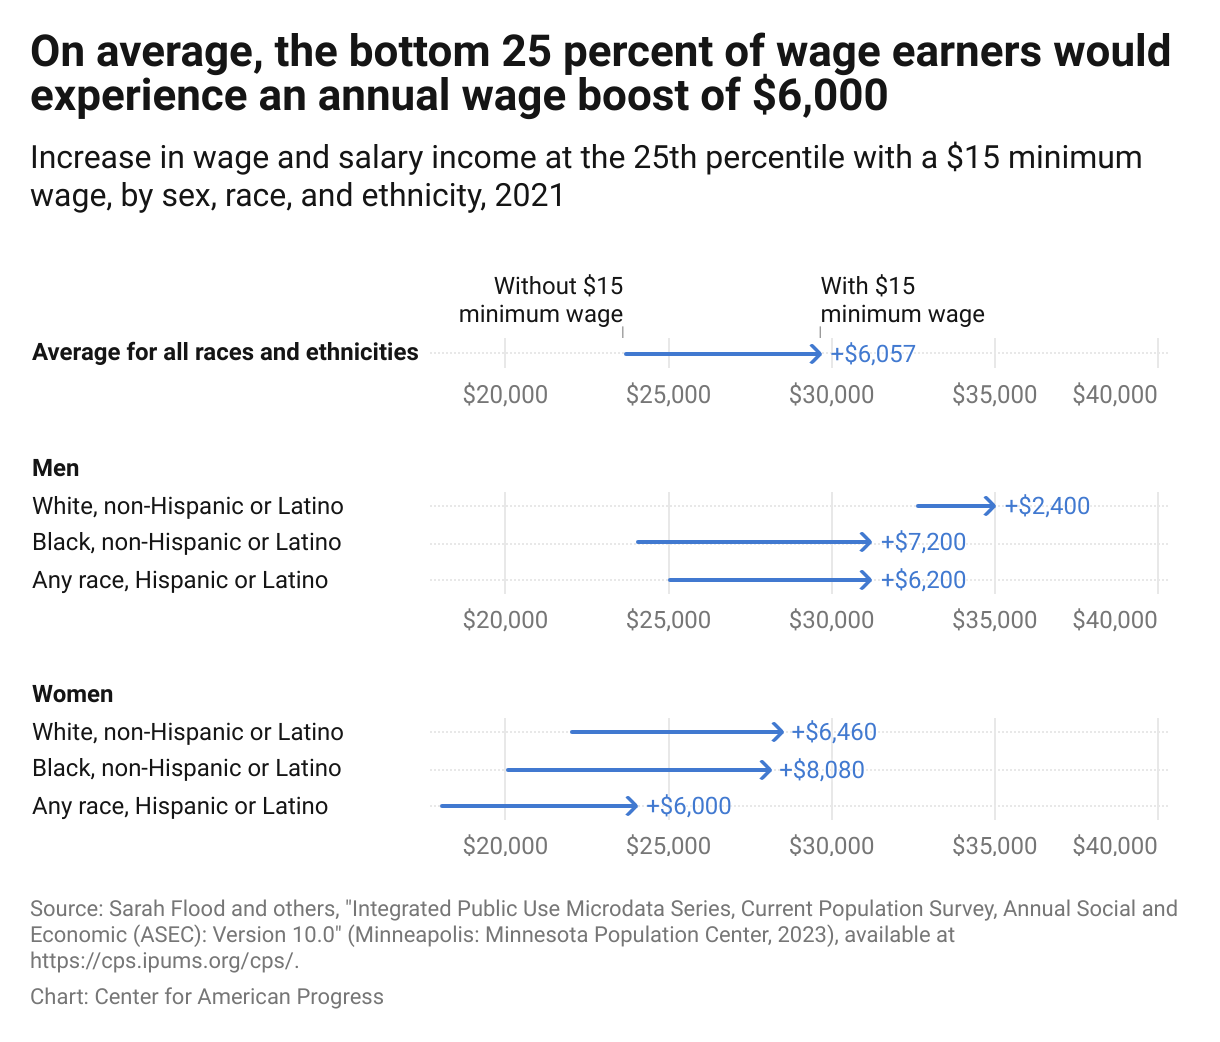 Arrow chart showing that Black women earning at the 25th percentile would have received the largest annual wage gain if a $15 minimum wage had been in place in 2021.